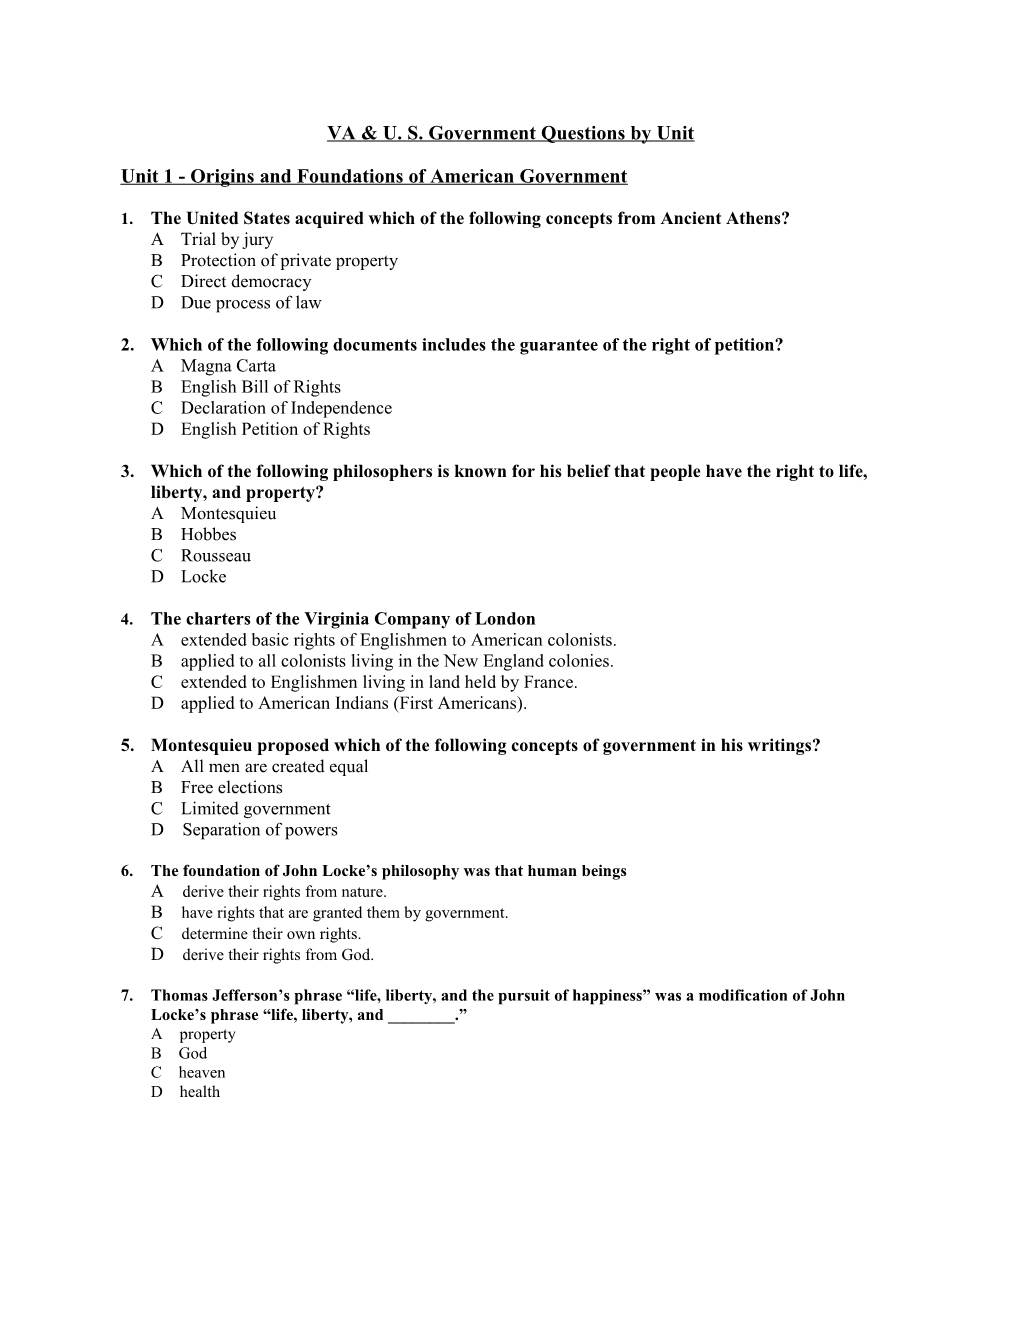 Unit 1 - Origins and Foundations of American Government